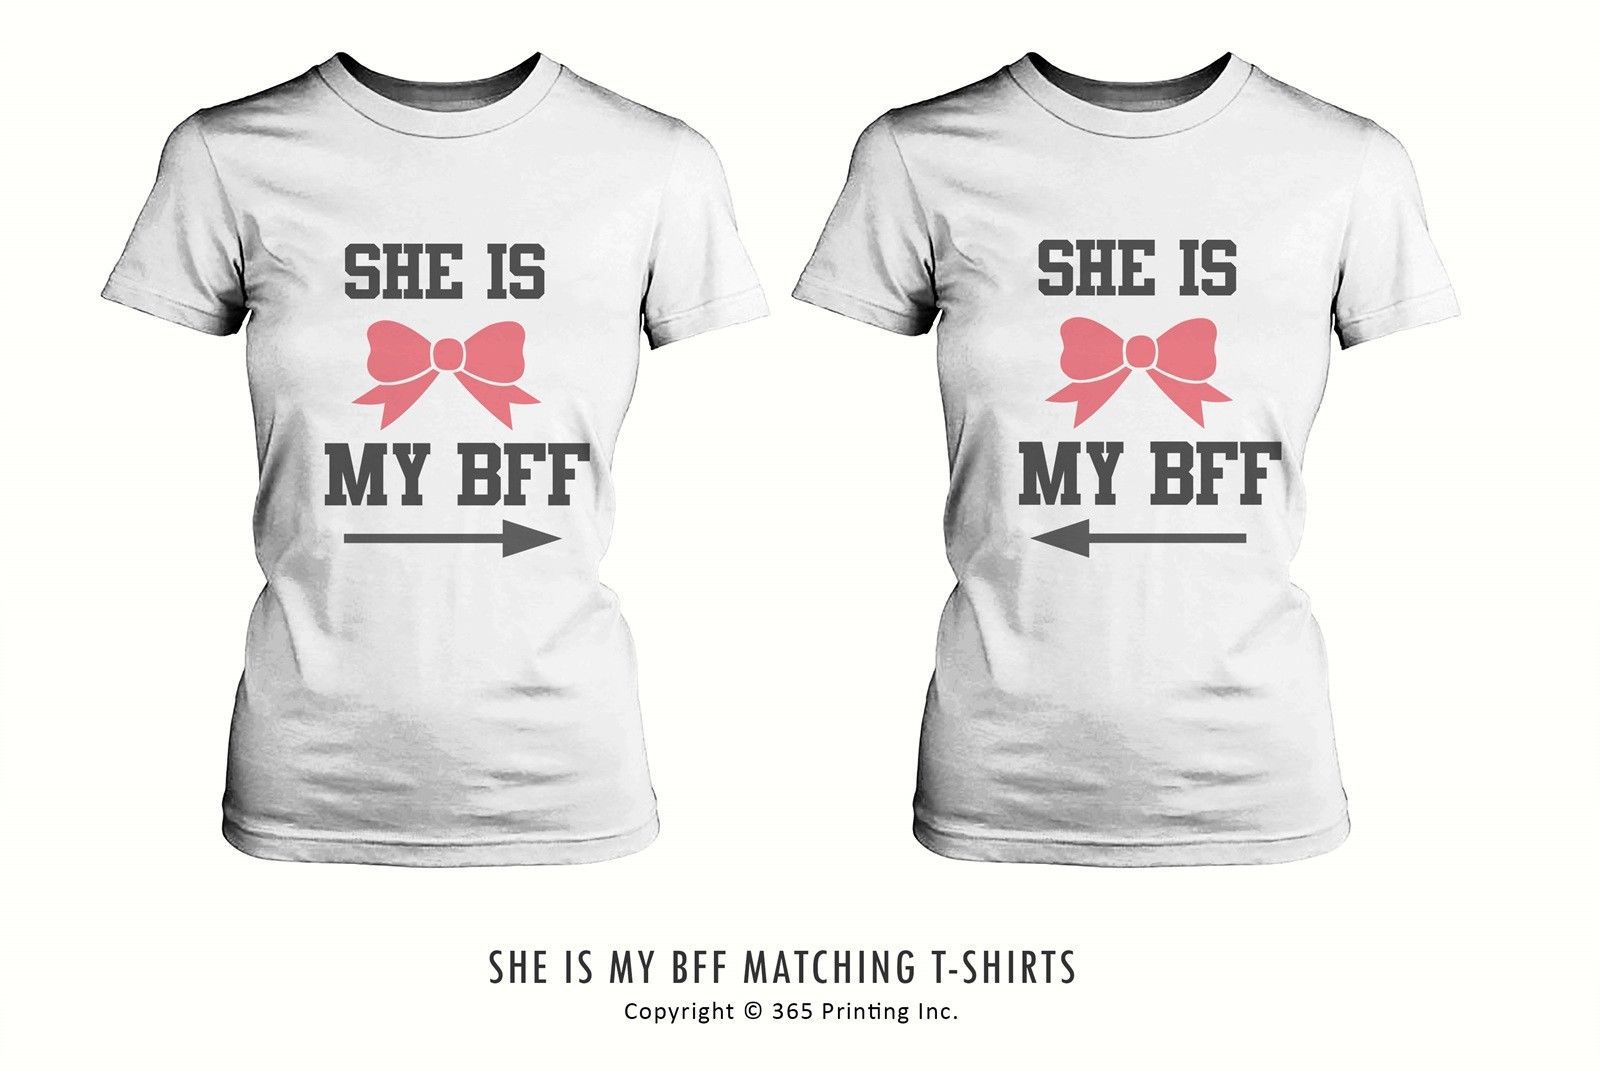 Best Friend Matching Shirts Shes My Bff T Shirts For Bff T Shirts